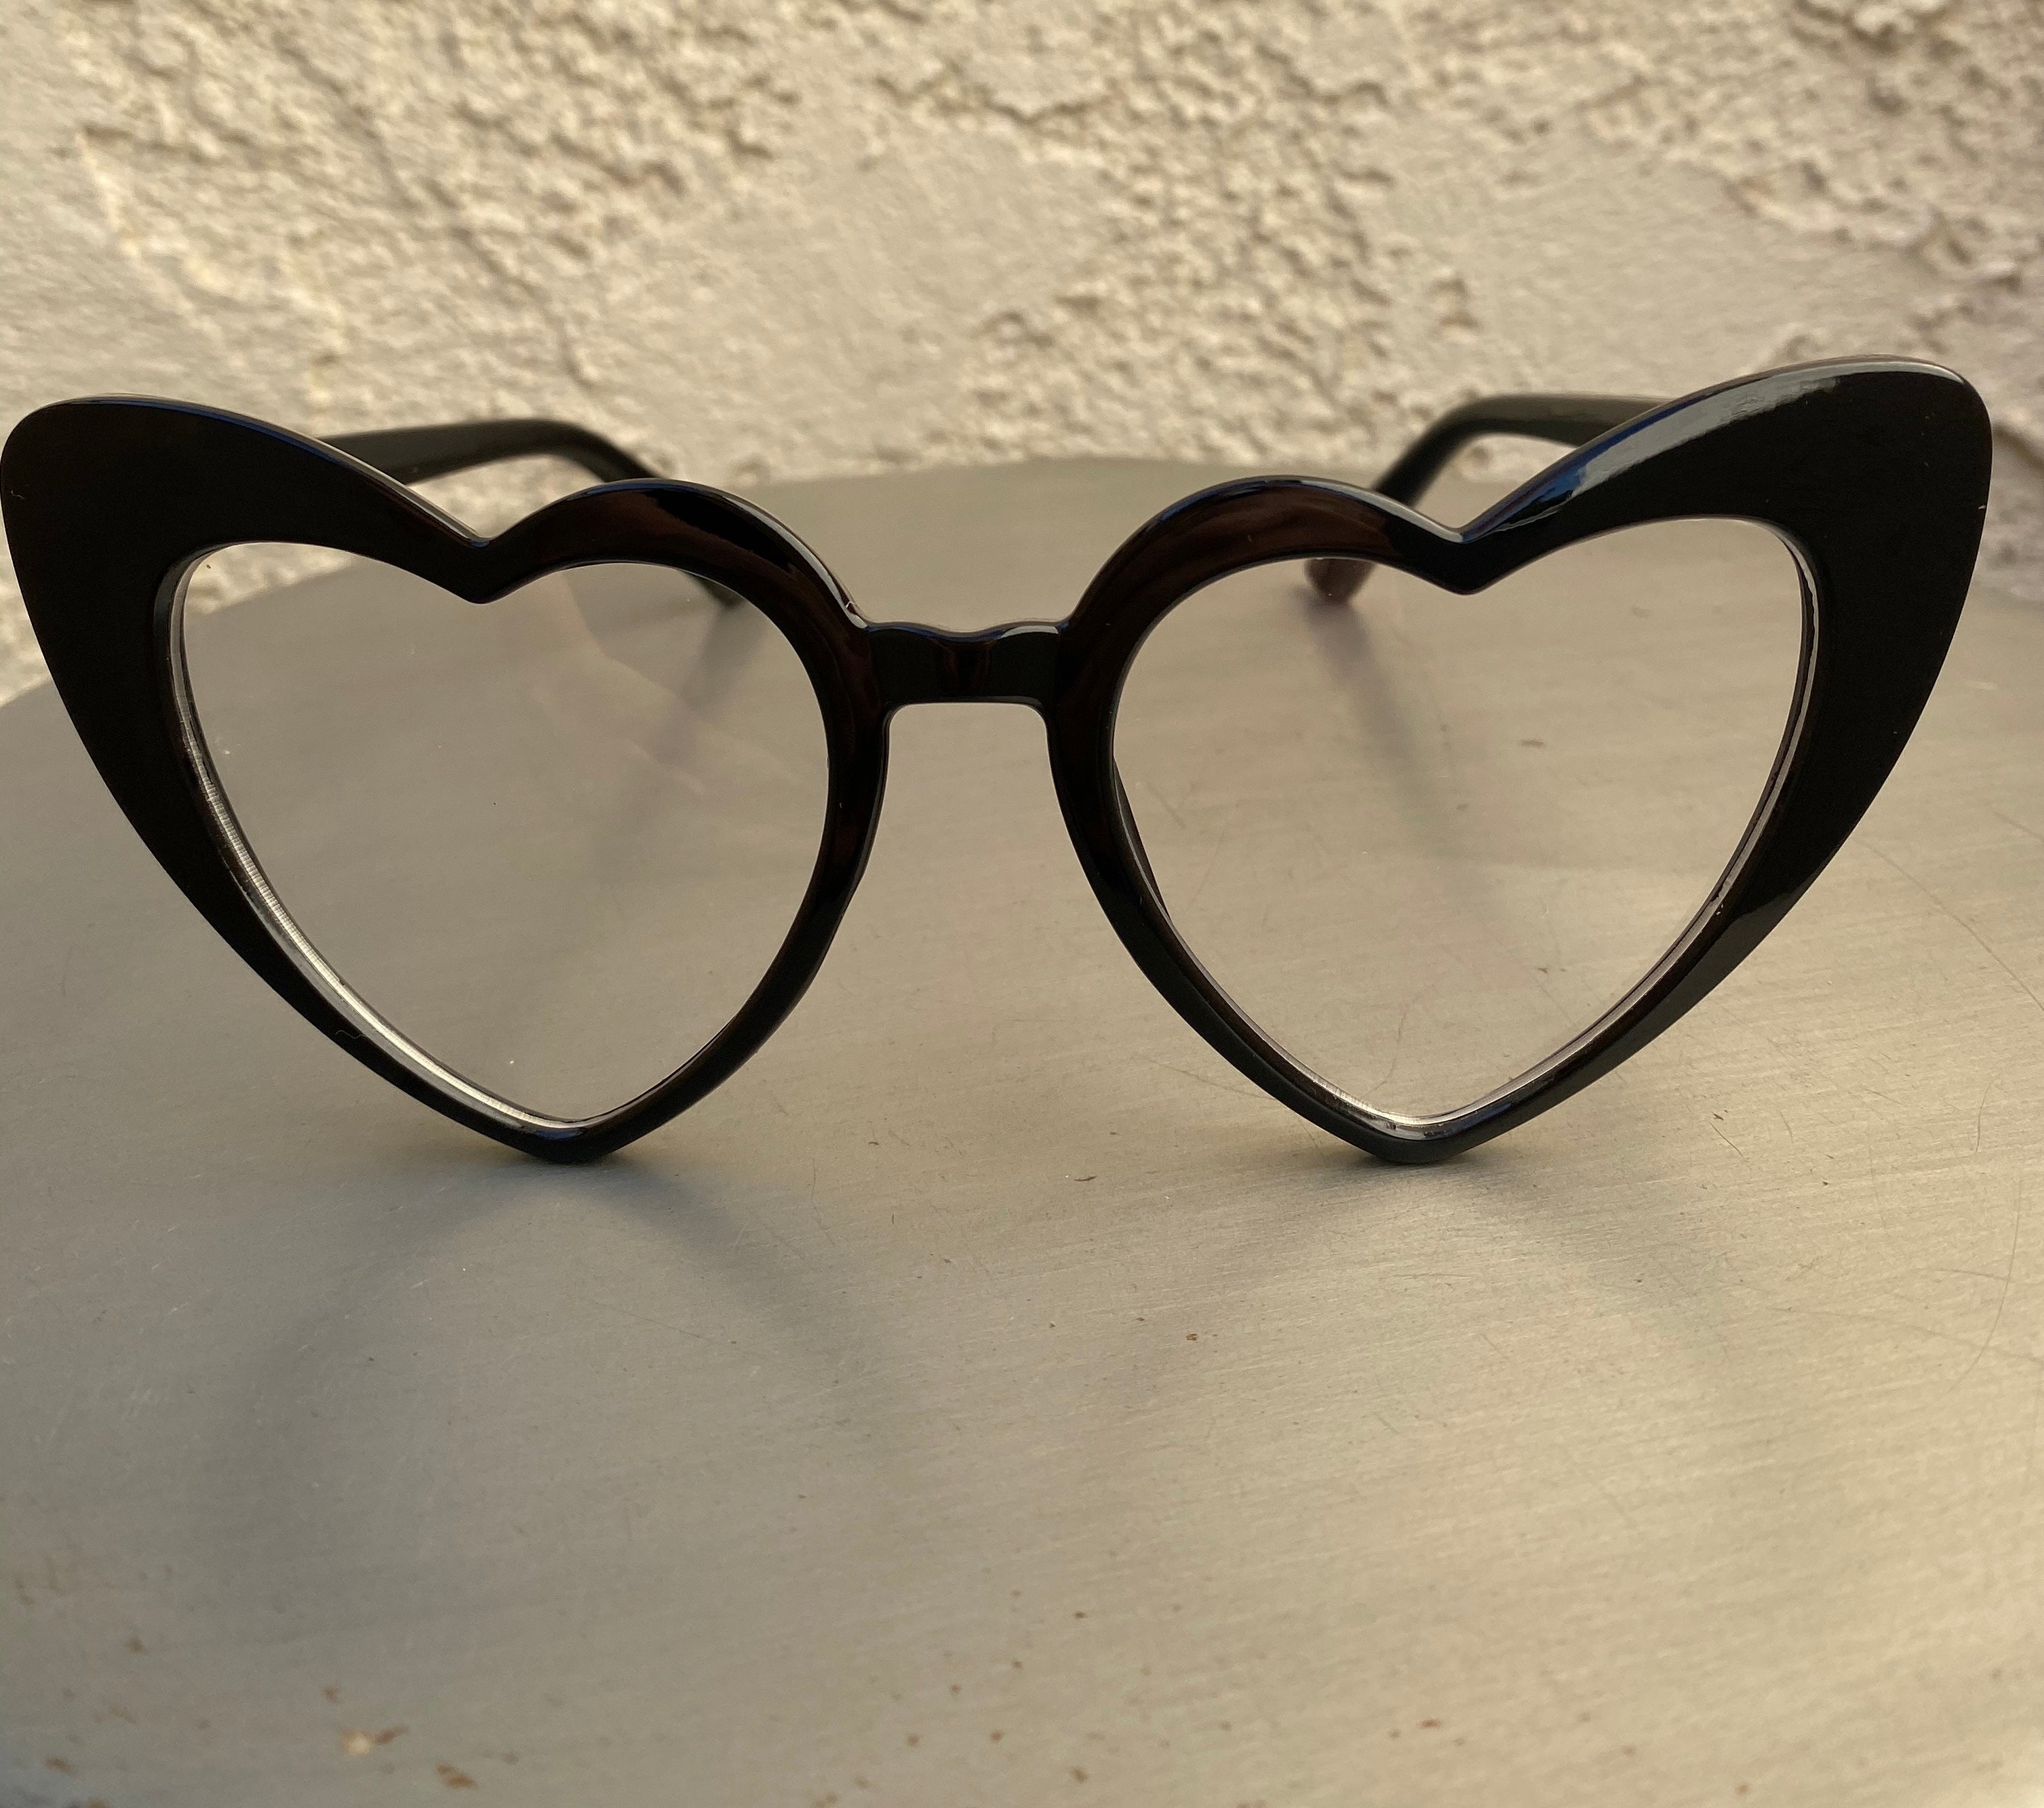 Heart Shaped Glasses "Miss Priss"